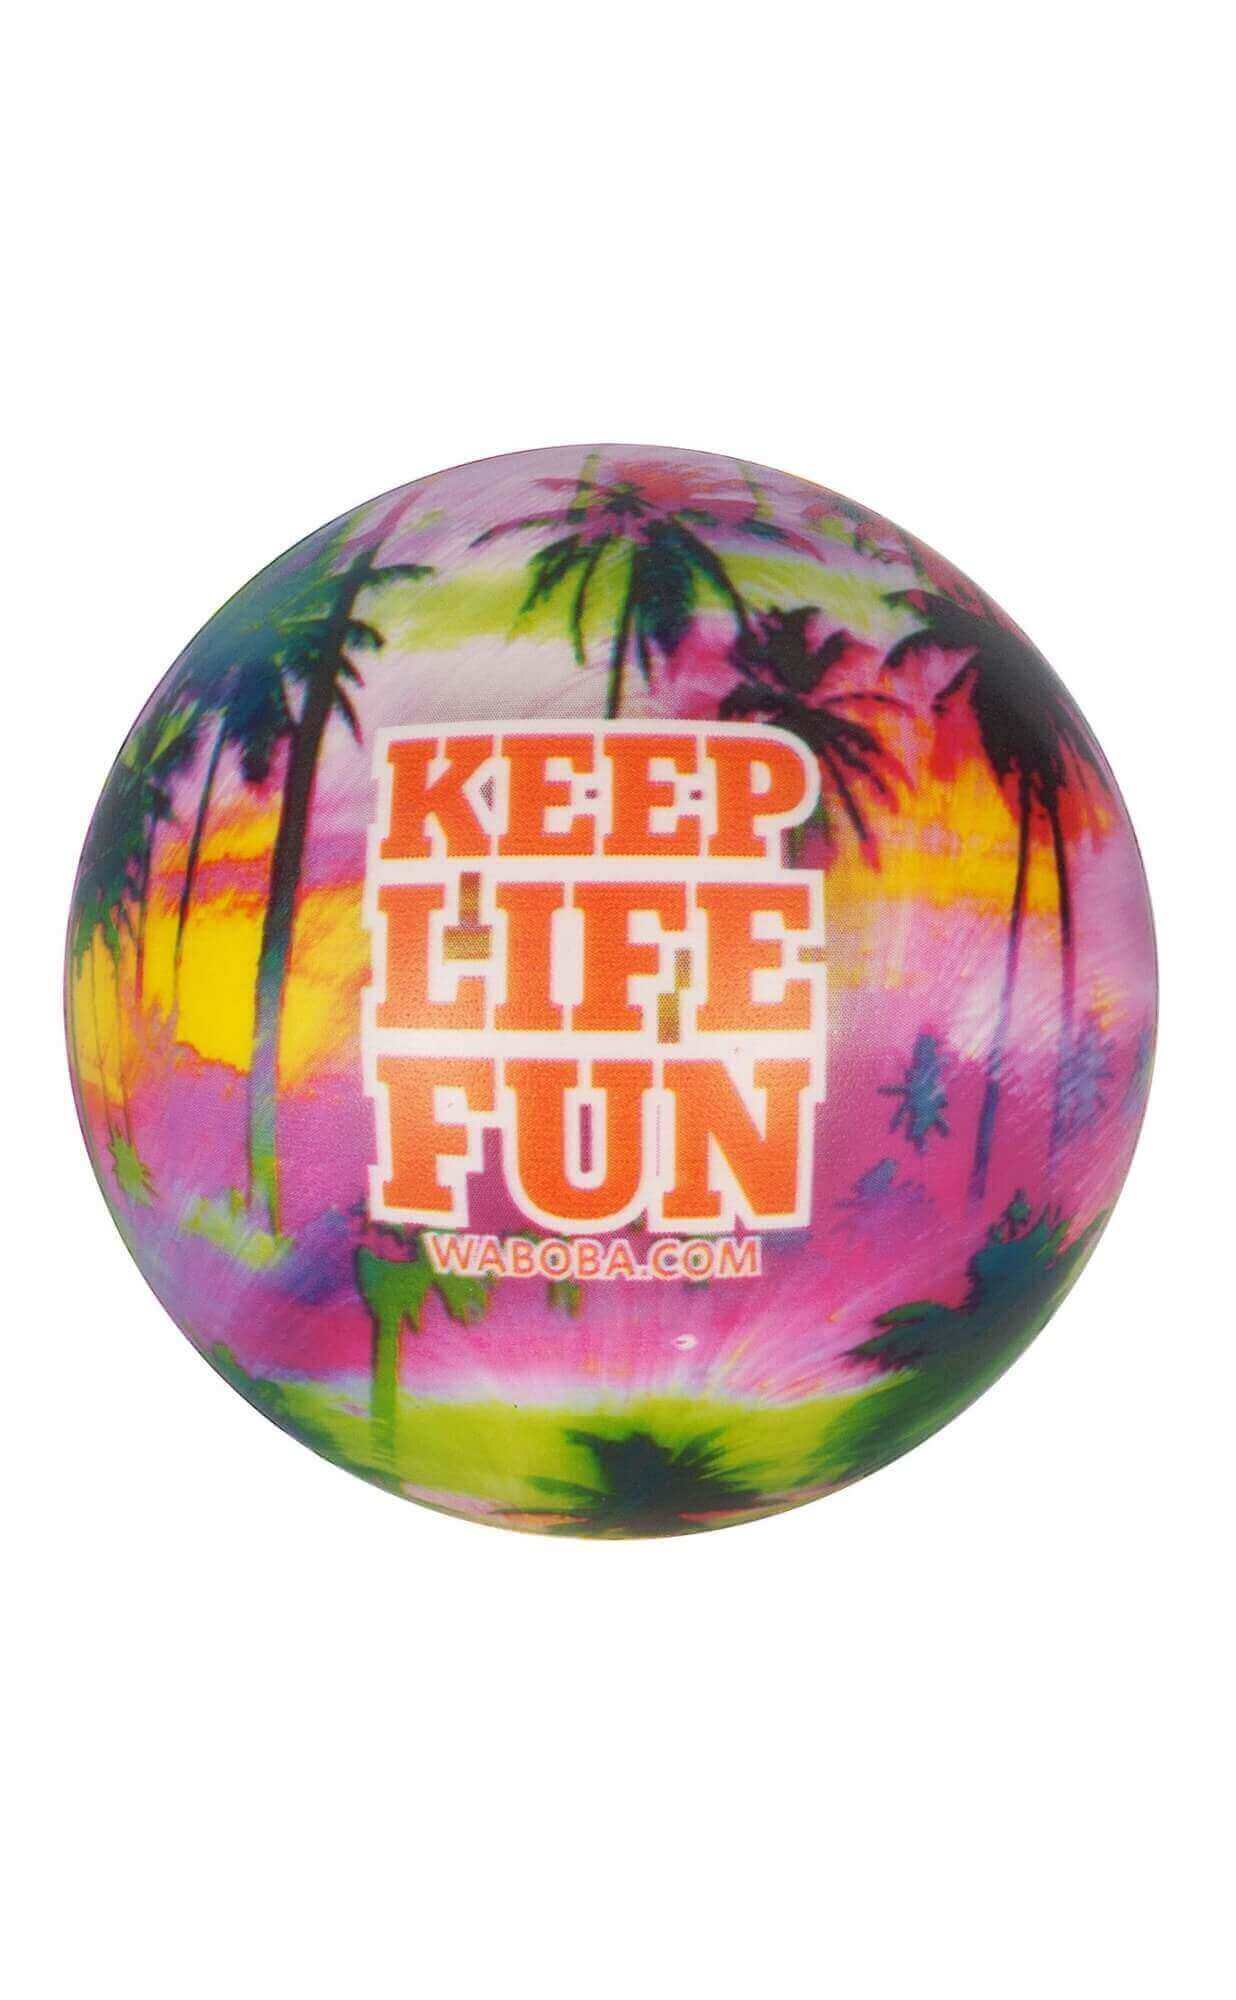 TROPICAL KAHUNA IN 2 TIER ASSORTED DESIGNS_TEAM_STUBBY CLUB